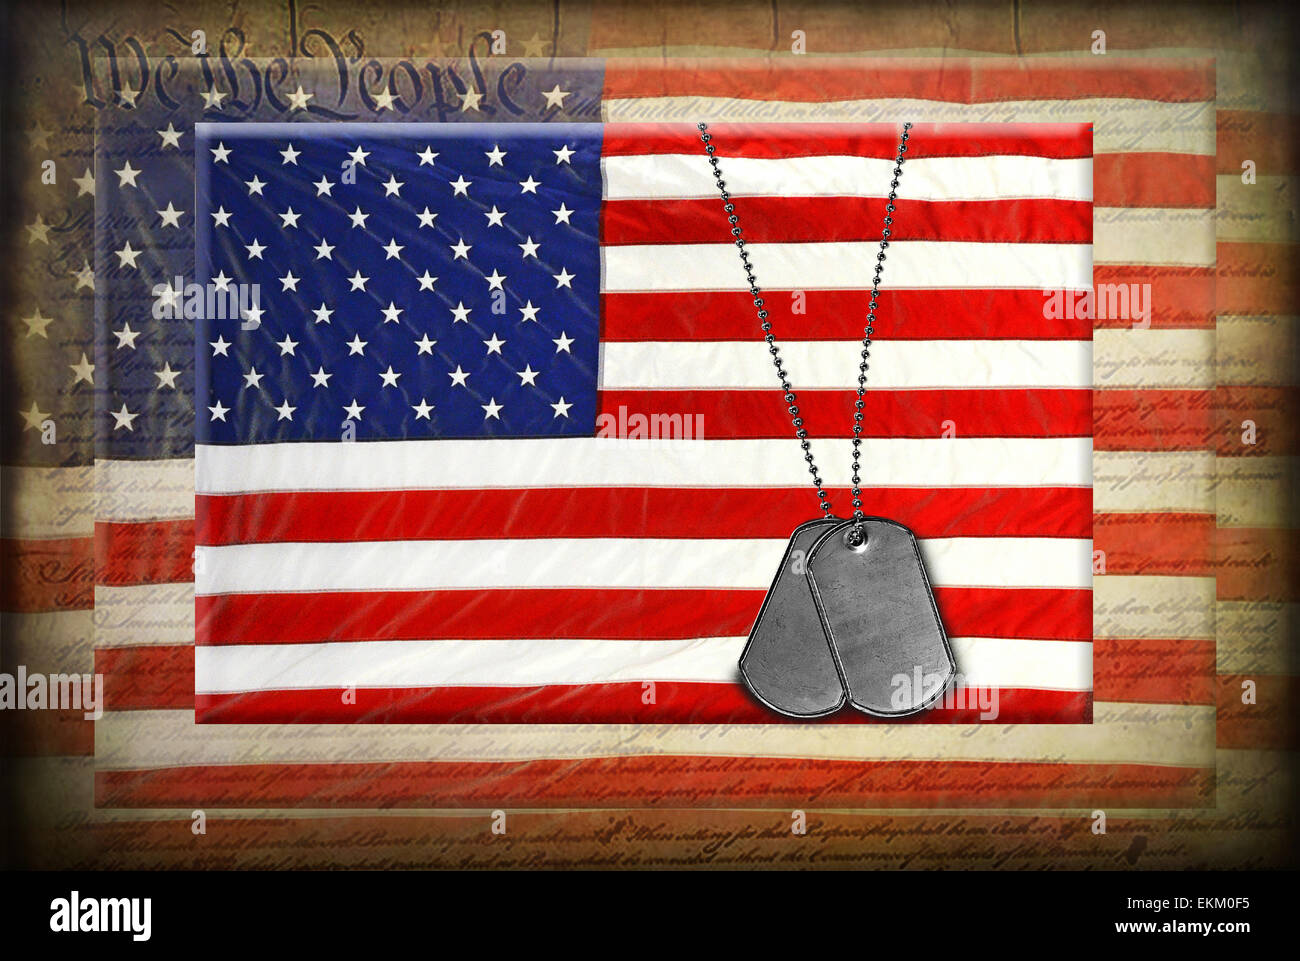 Military dog tags on an American flag with textured layers. Stock Photo